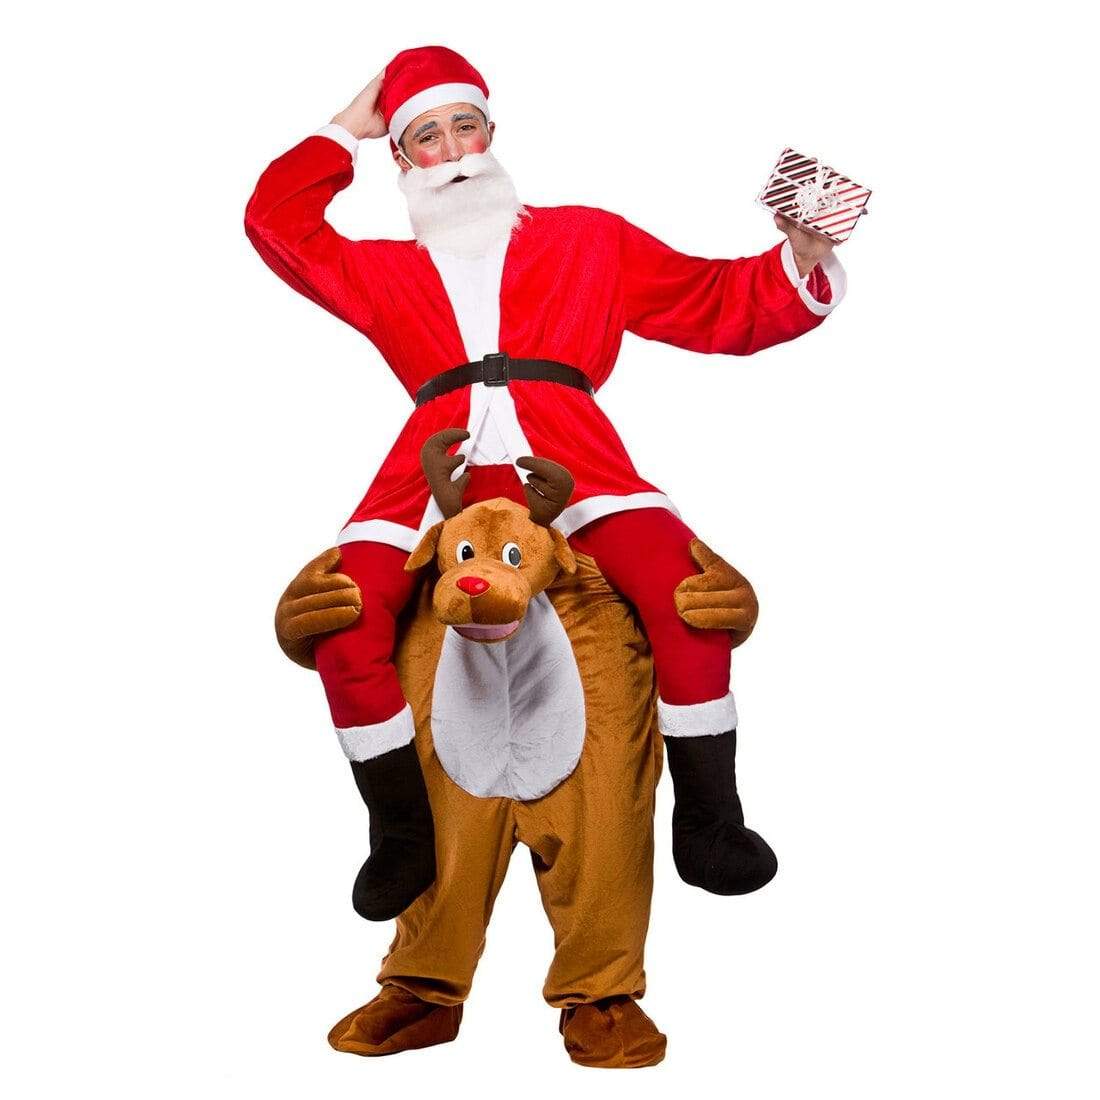 male model wears carry me brown reindeer costume with red nose and antlers